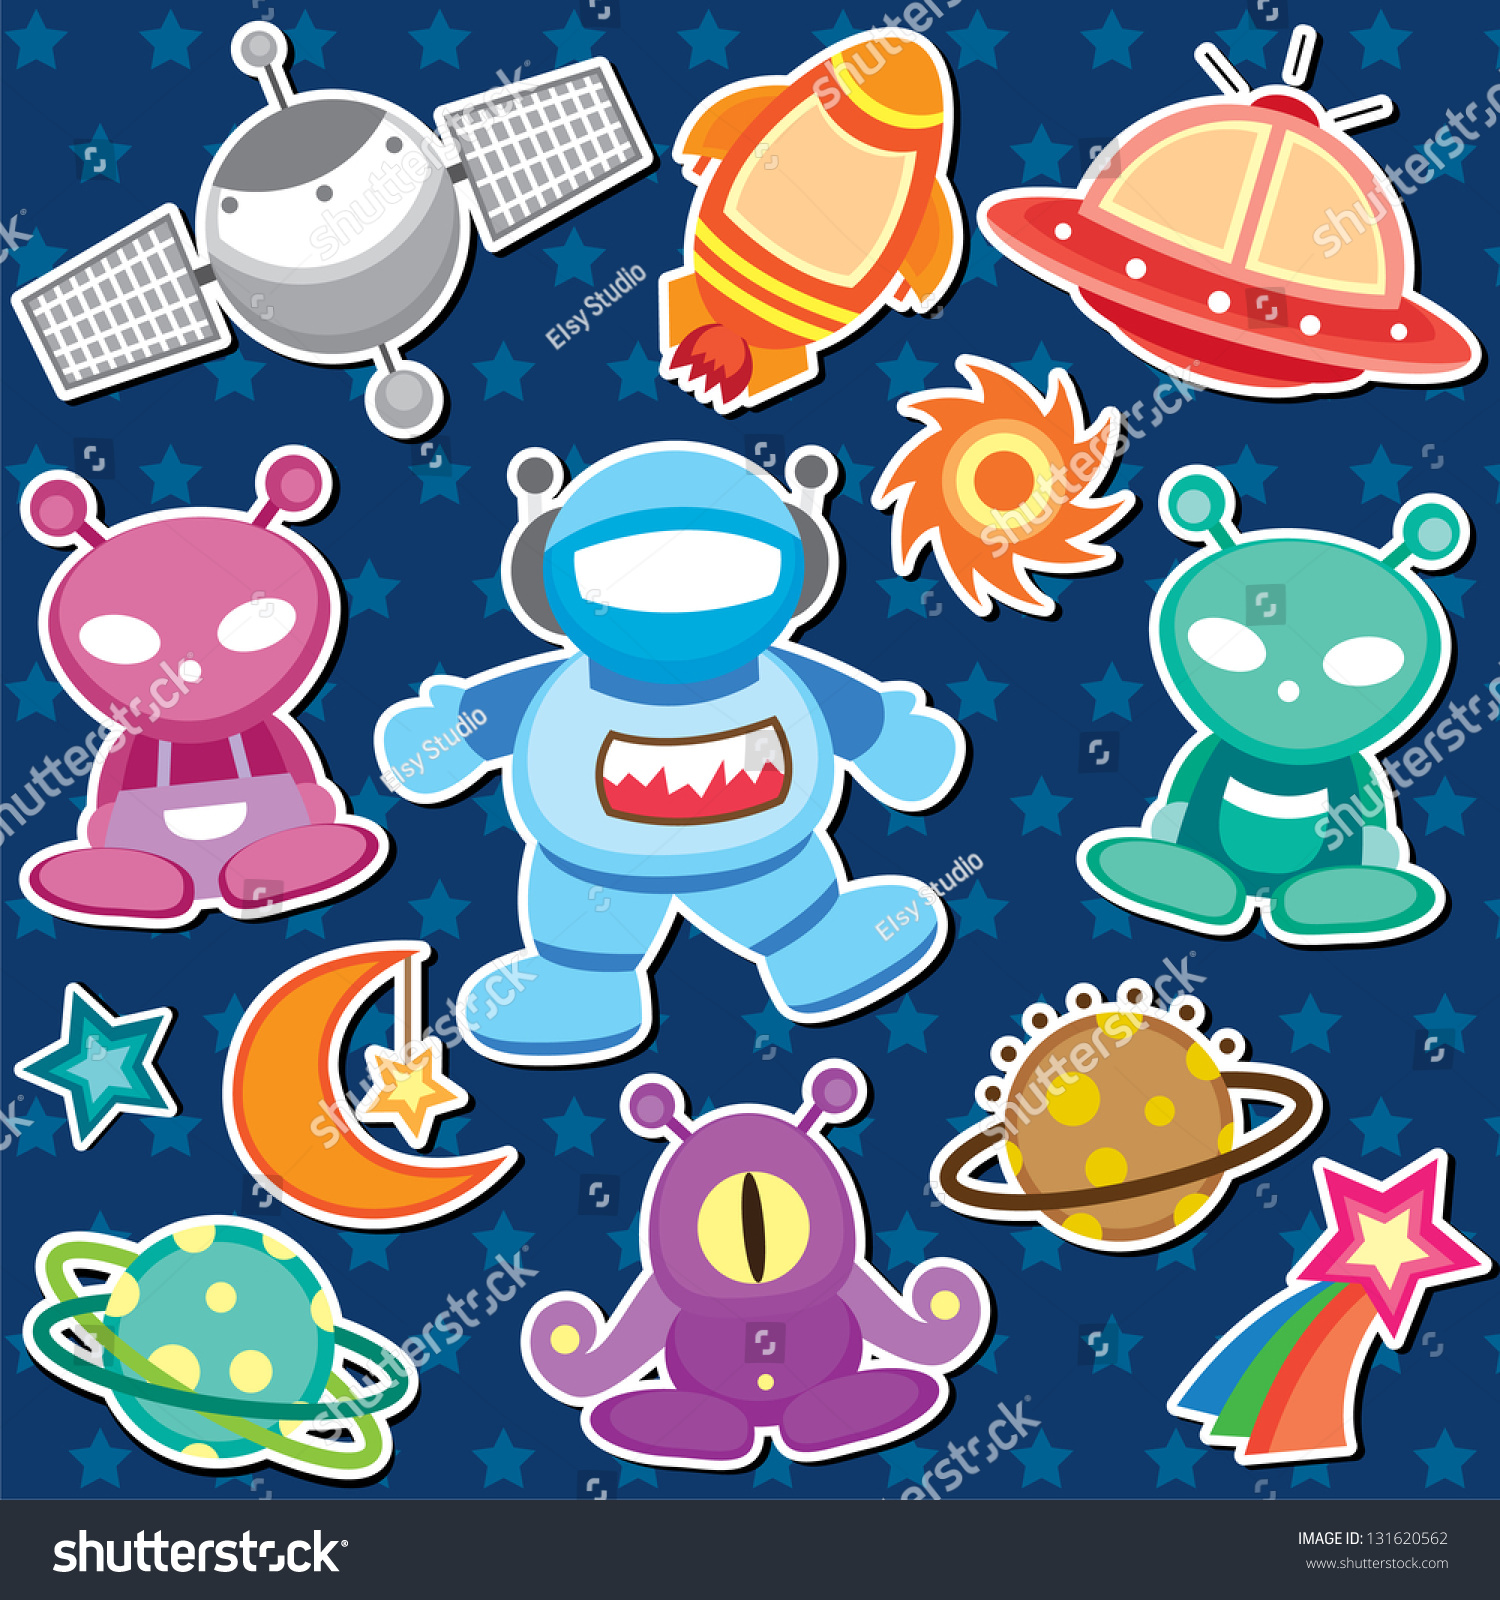 space dog clipart - photo #36